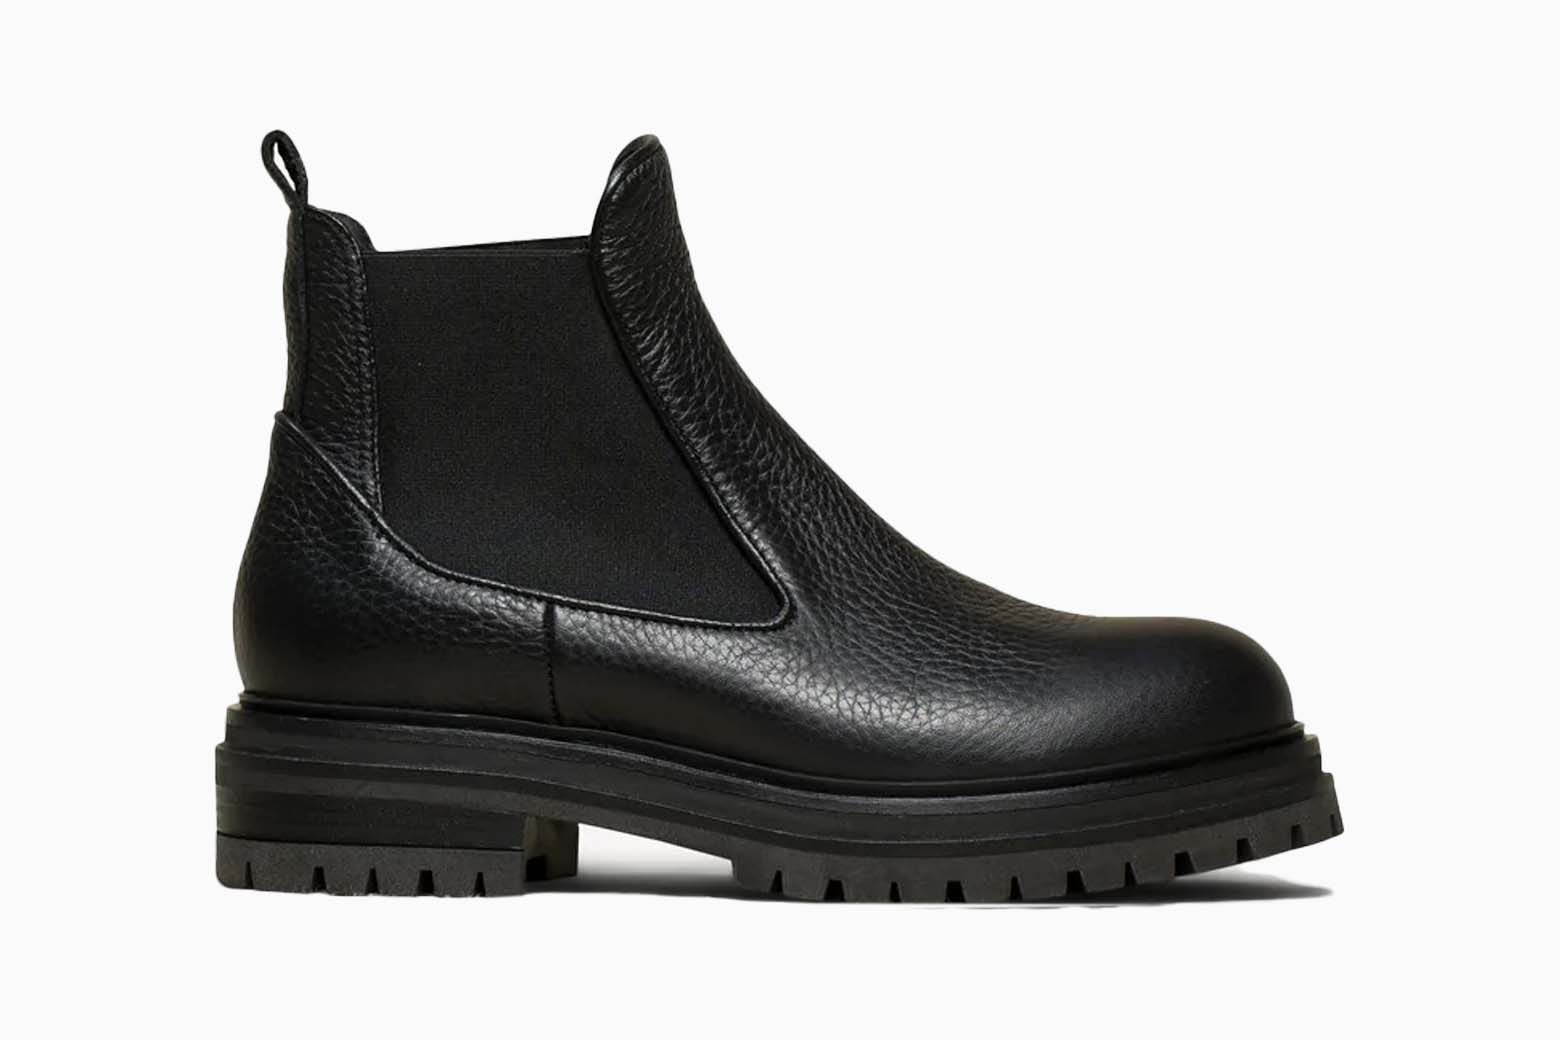 21 Best Chelsea Boots For Women: The Most Stylish Boots